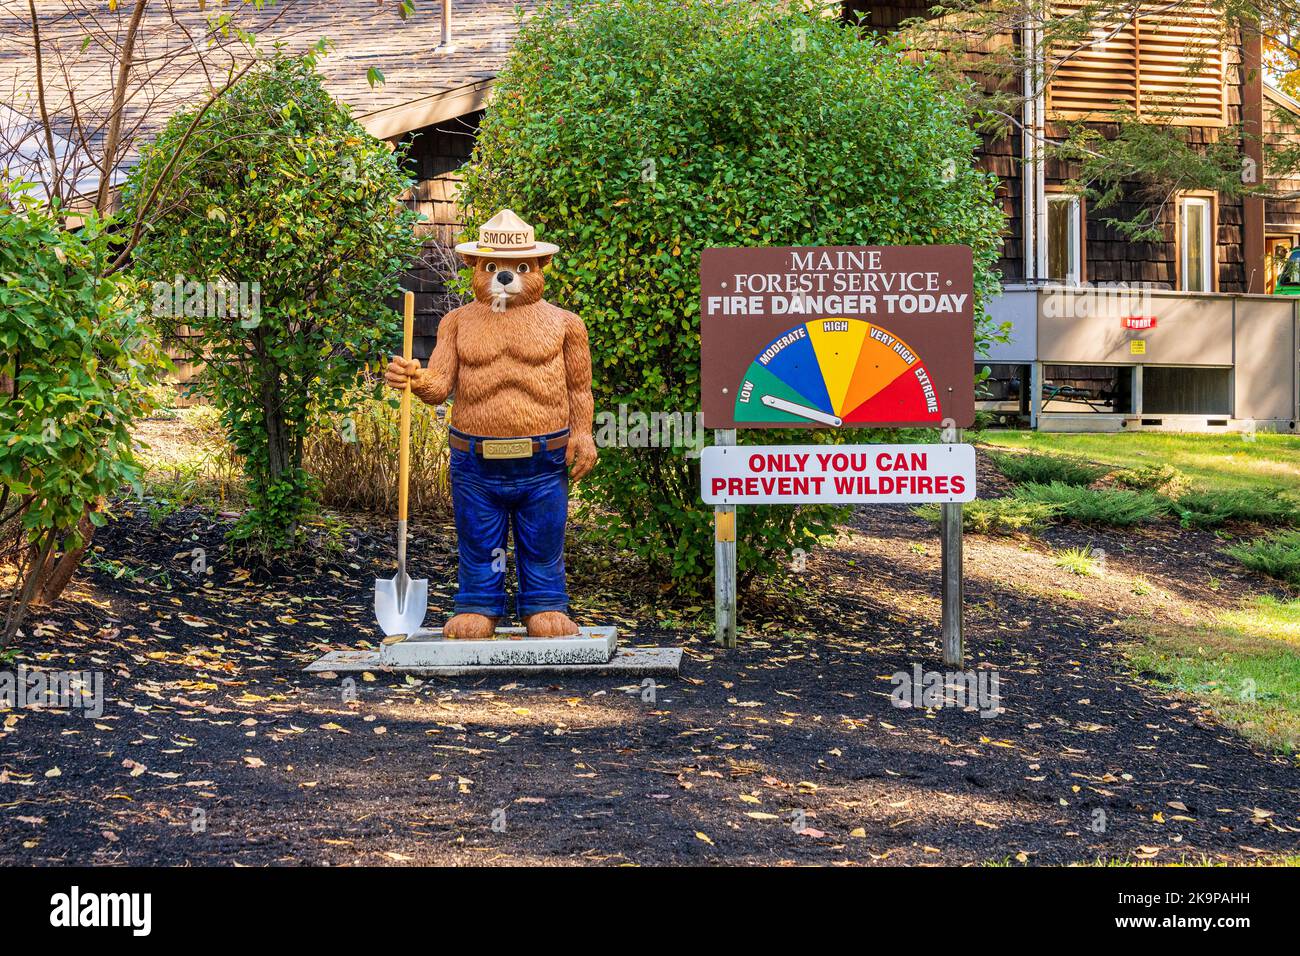 Kittery, ME - Oct. 19, 2022: Smokey the Bear stands beside a Maine Forestry Service Fire Danger Today sign with 'Only You Can Prevent Forest Fires' at Stock Photo